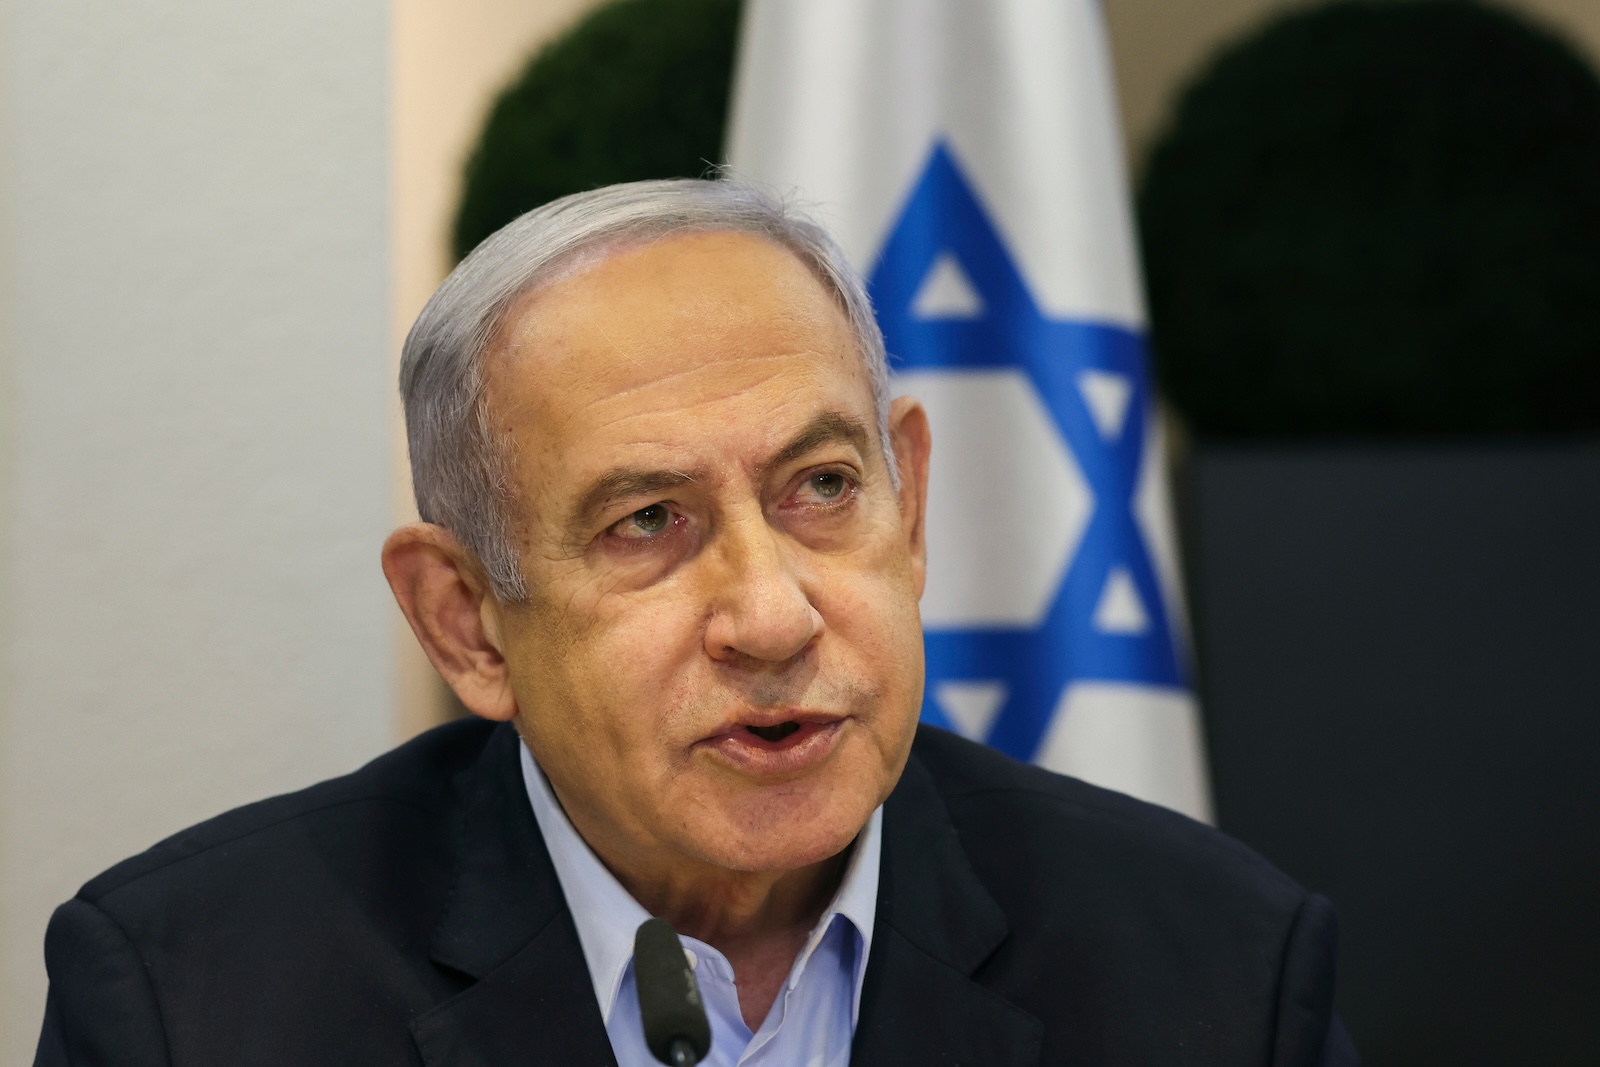 epa11253801 (FILE) - Israeli Prime Minister Benjamin Netanyahu convenes the weekly cabinet meeting at the Defence Ministry in Tel Aviv, Israel, 07 January 2024 (reissued 31 March 2024). Israeli Prime Minister Benjamin Netanyahu will undergo hernia surgery, his office announced on 31 March 2024.  EPA/RONEN ZVULUN / POOL